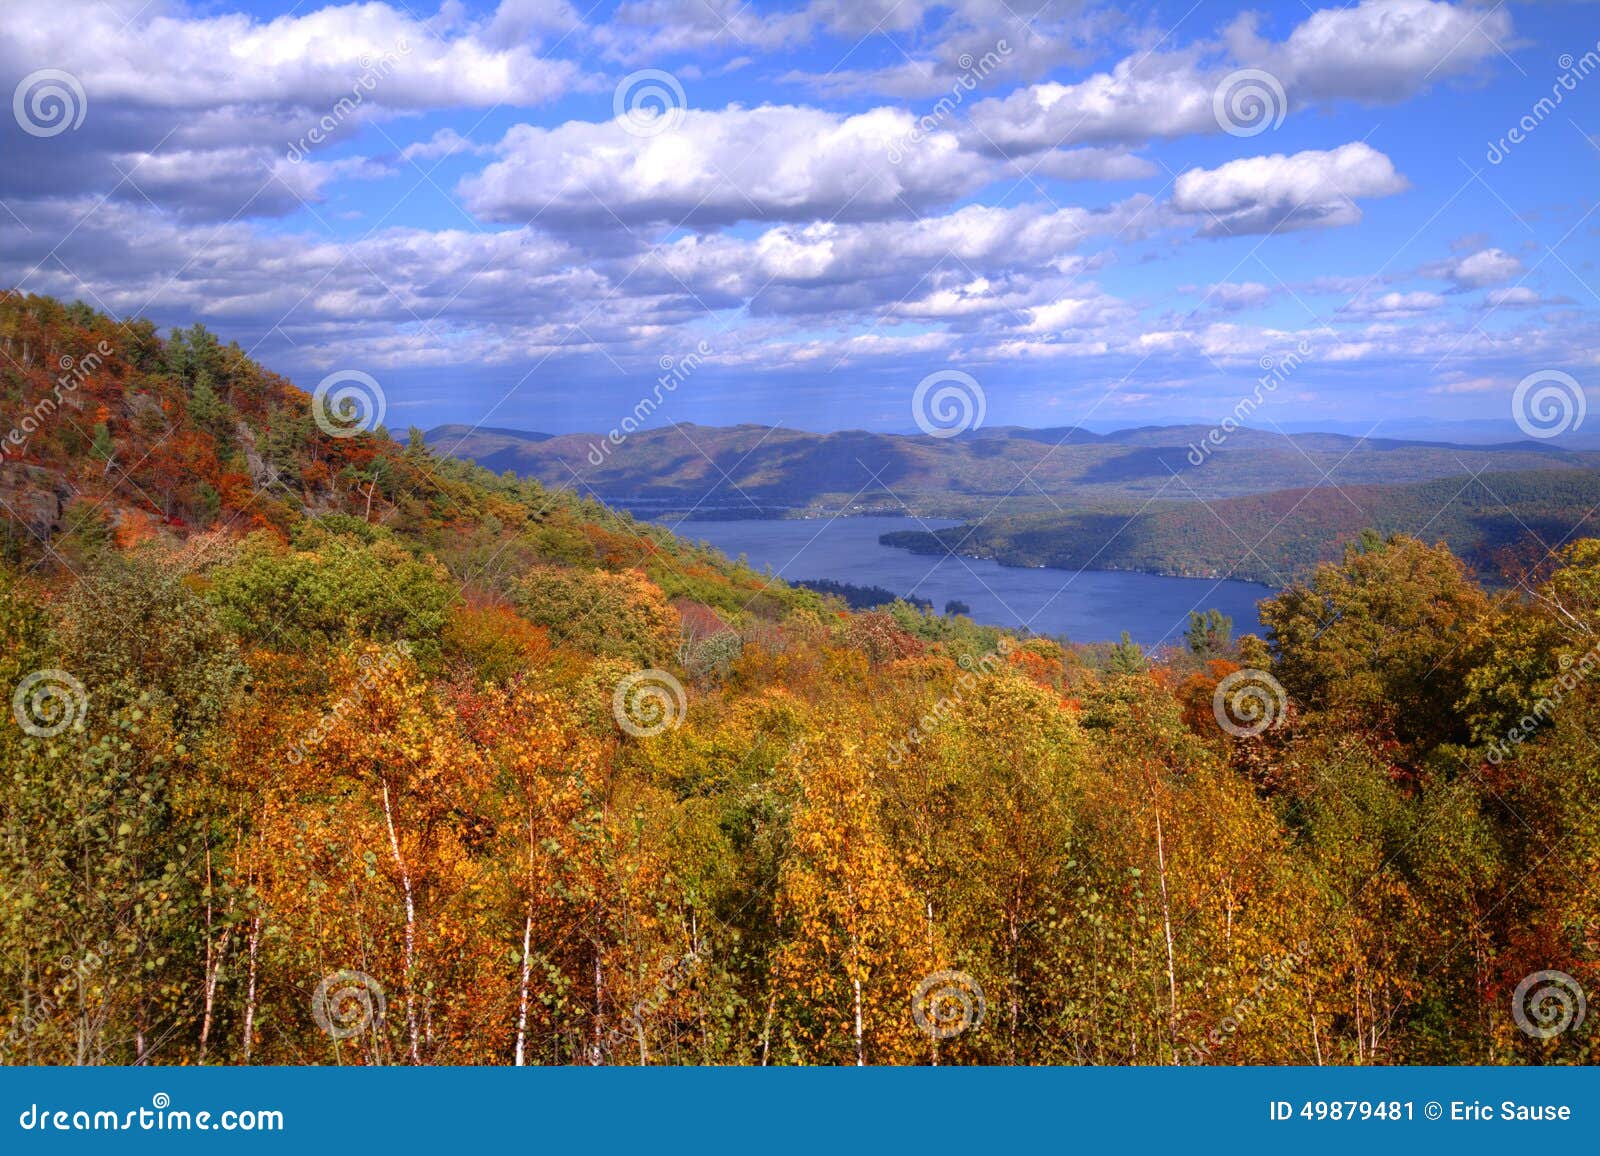 view of lake george, ny in autumn from mountain top